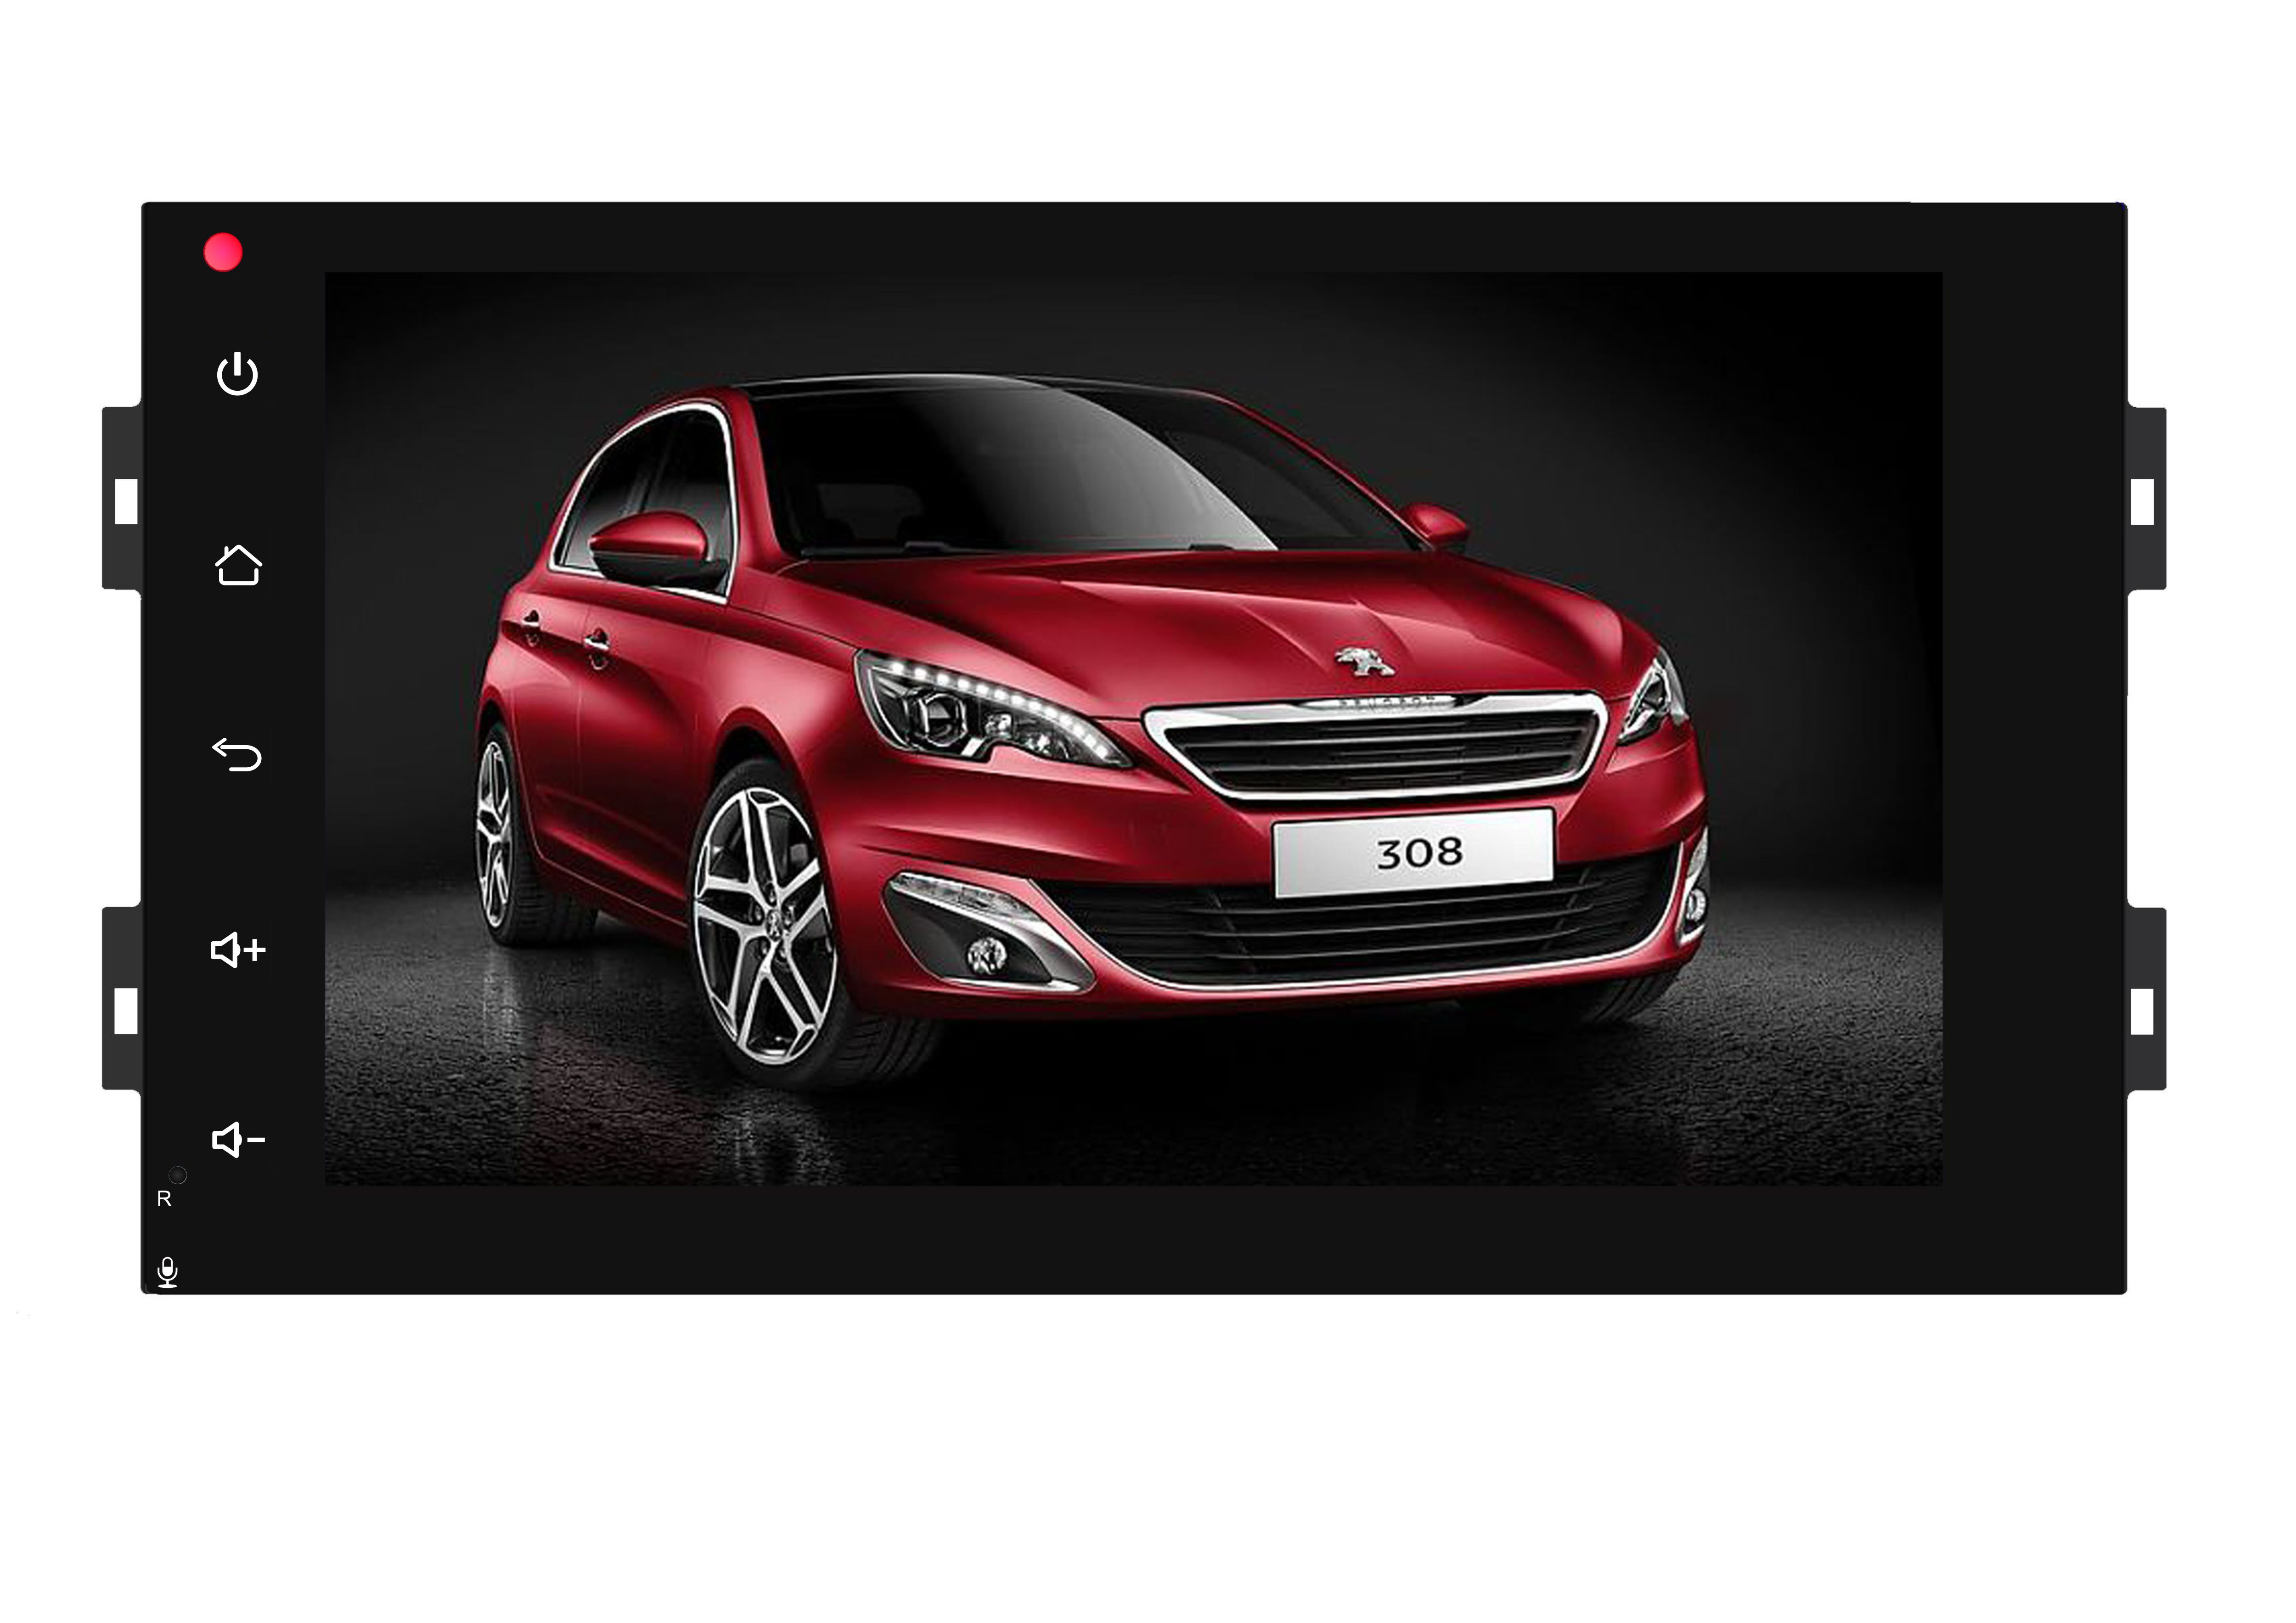 PEUGEOT 308 Android 7.1/6.0 8'' HD Touch Screen Car PC Android 7.1/6.0 RDS Quad/Eight Cores Car Stereo radio player Auto GPS navi BT Wifi Mirror link Freemap